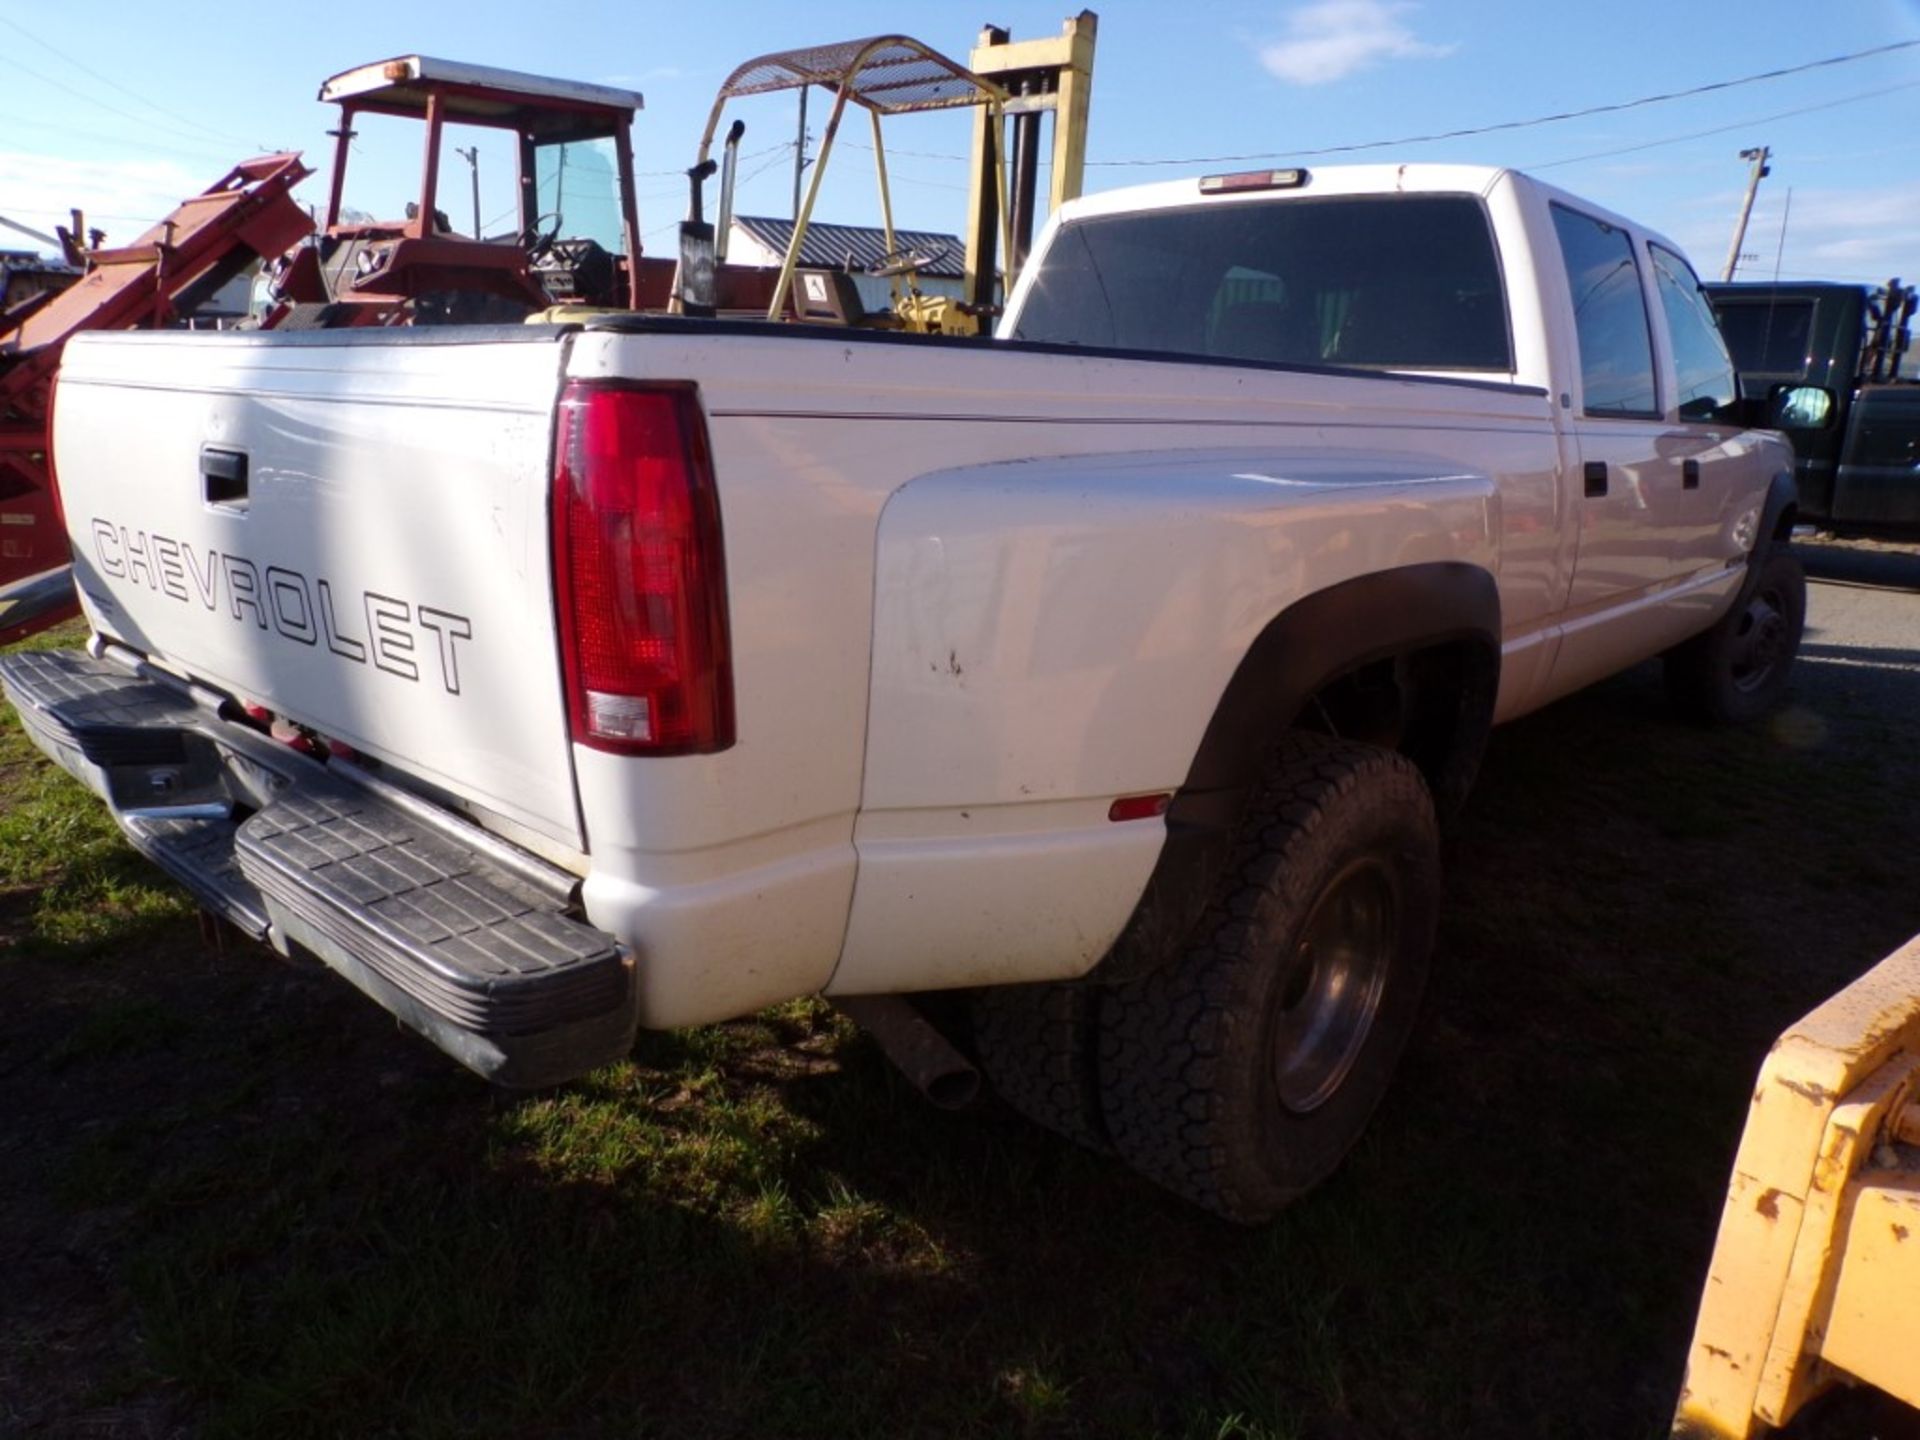 2000 Chevrolet 3500 Dually Crew Cab with 8' Box, Gas 5.7 V8, Auto, 4 WD, Has Rails for Hitch System, - Image 4 of 6